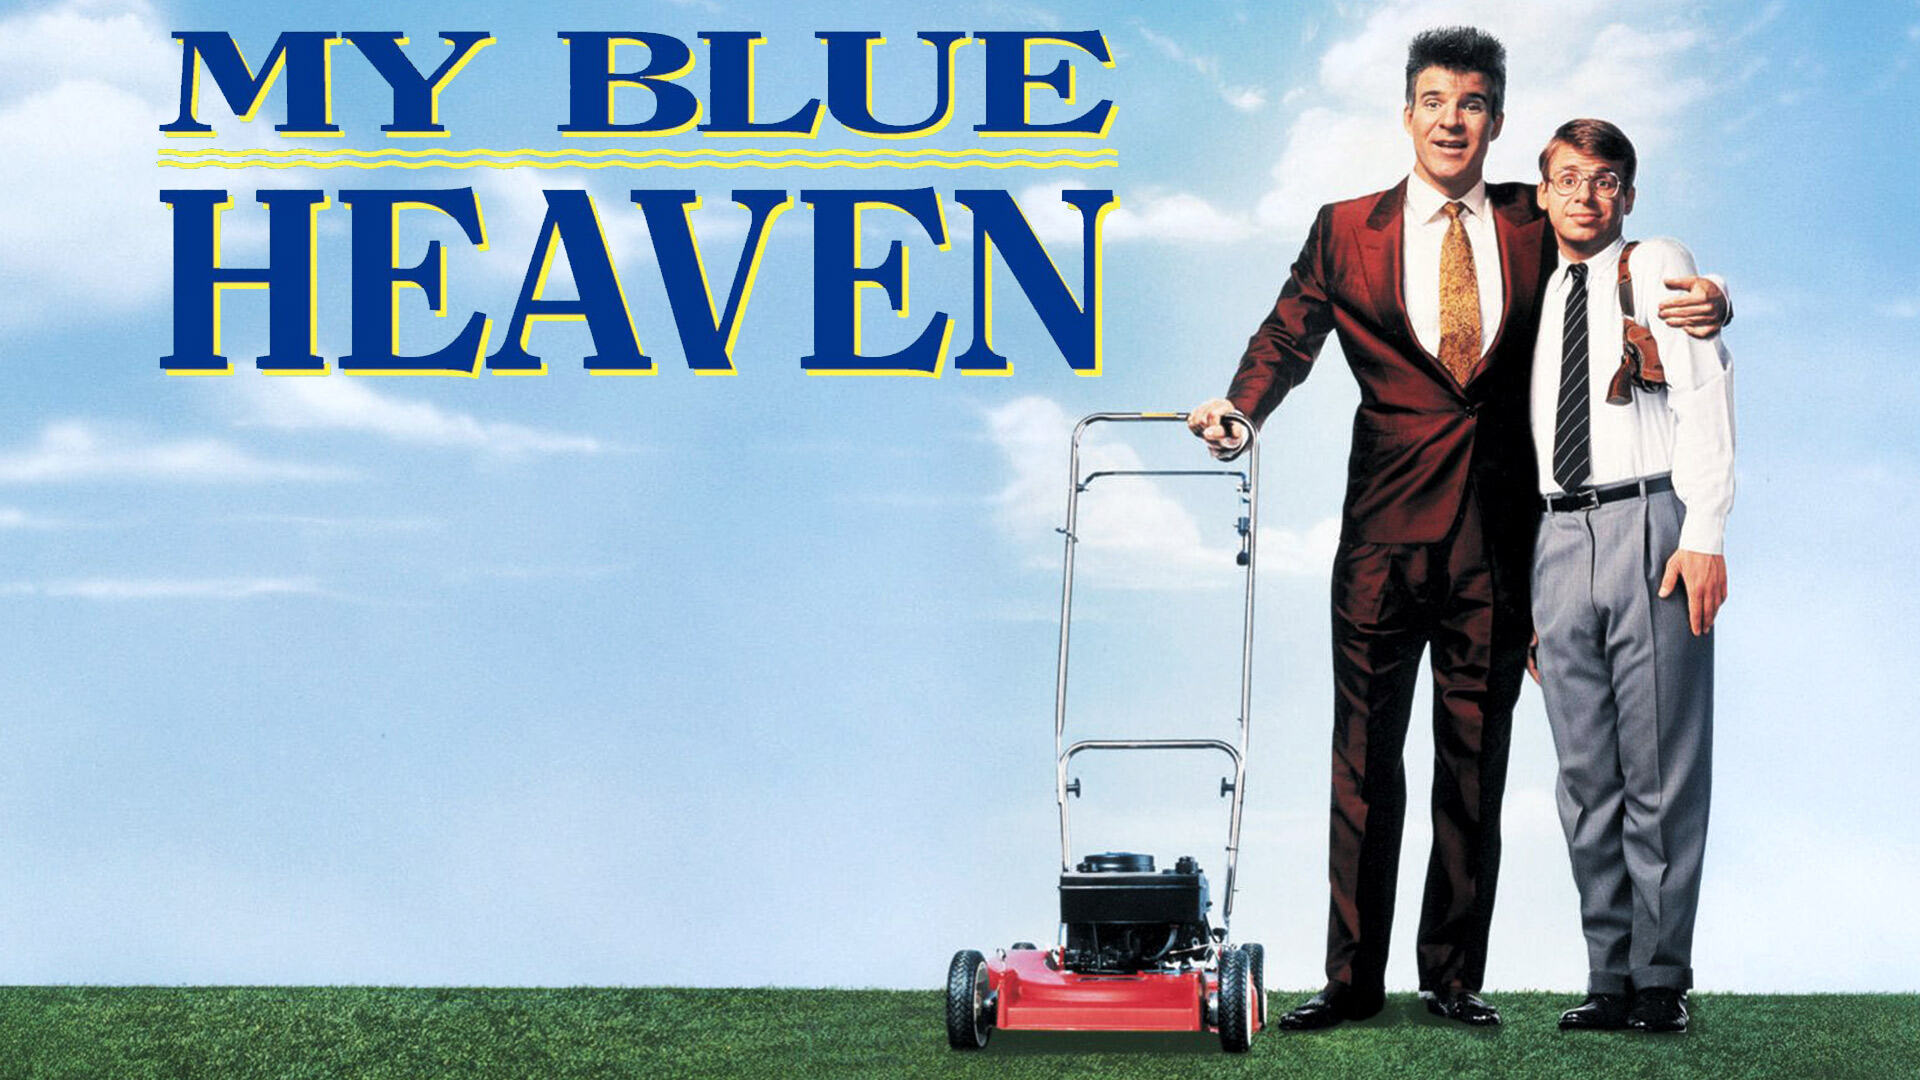 39-facts-about-the-movie-my-blue-heaven